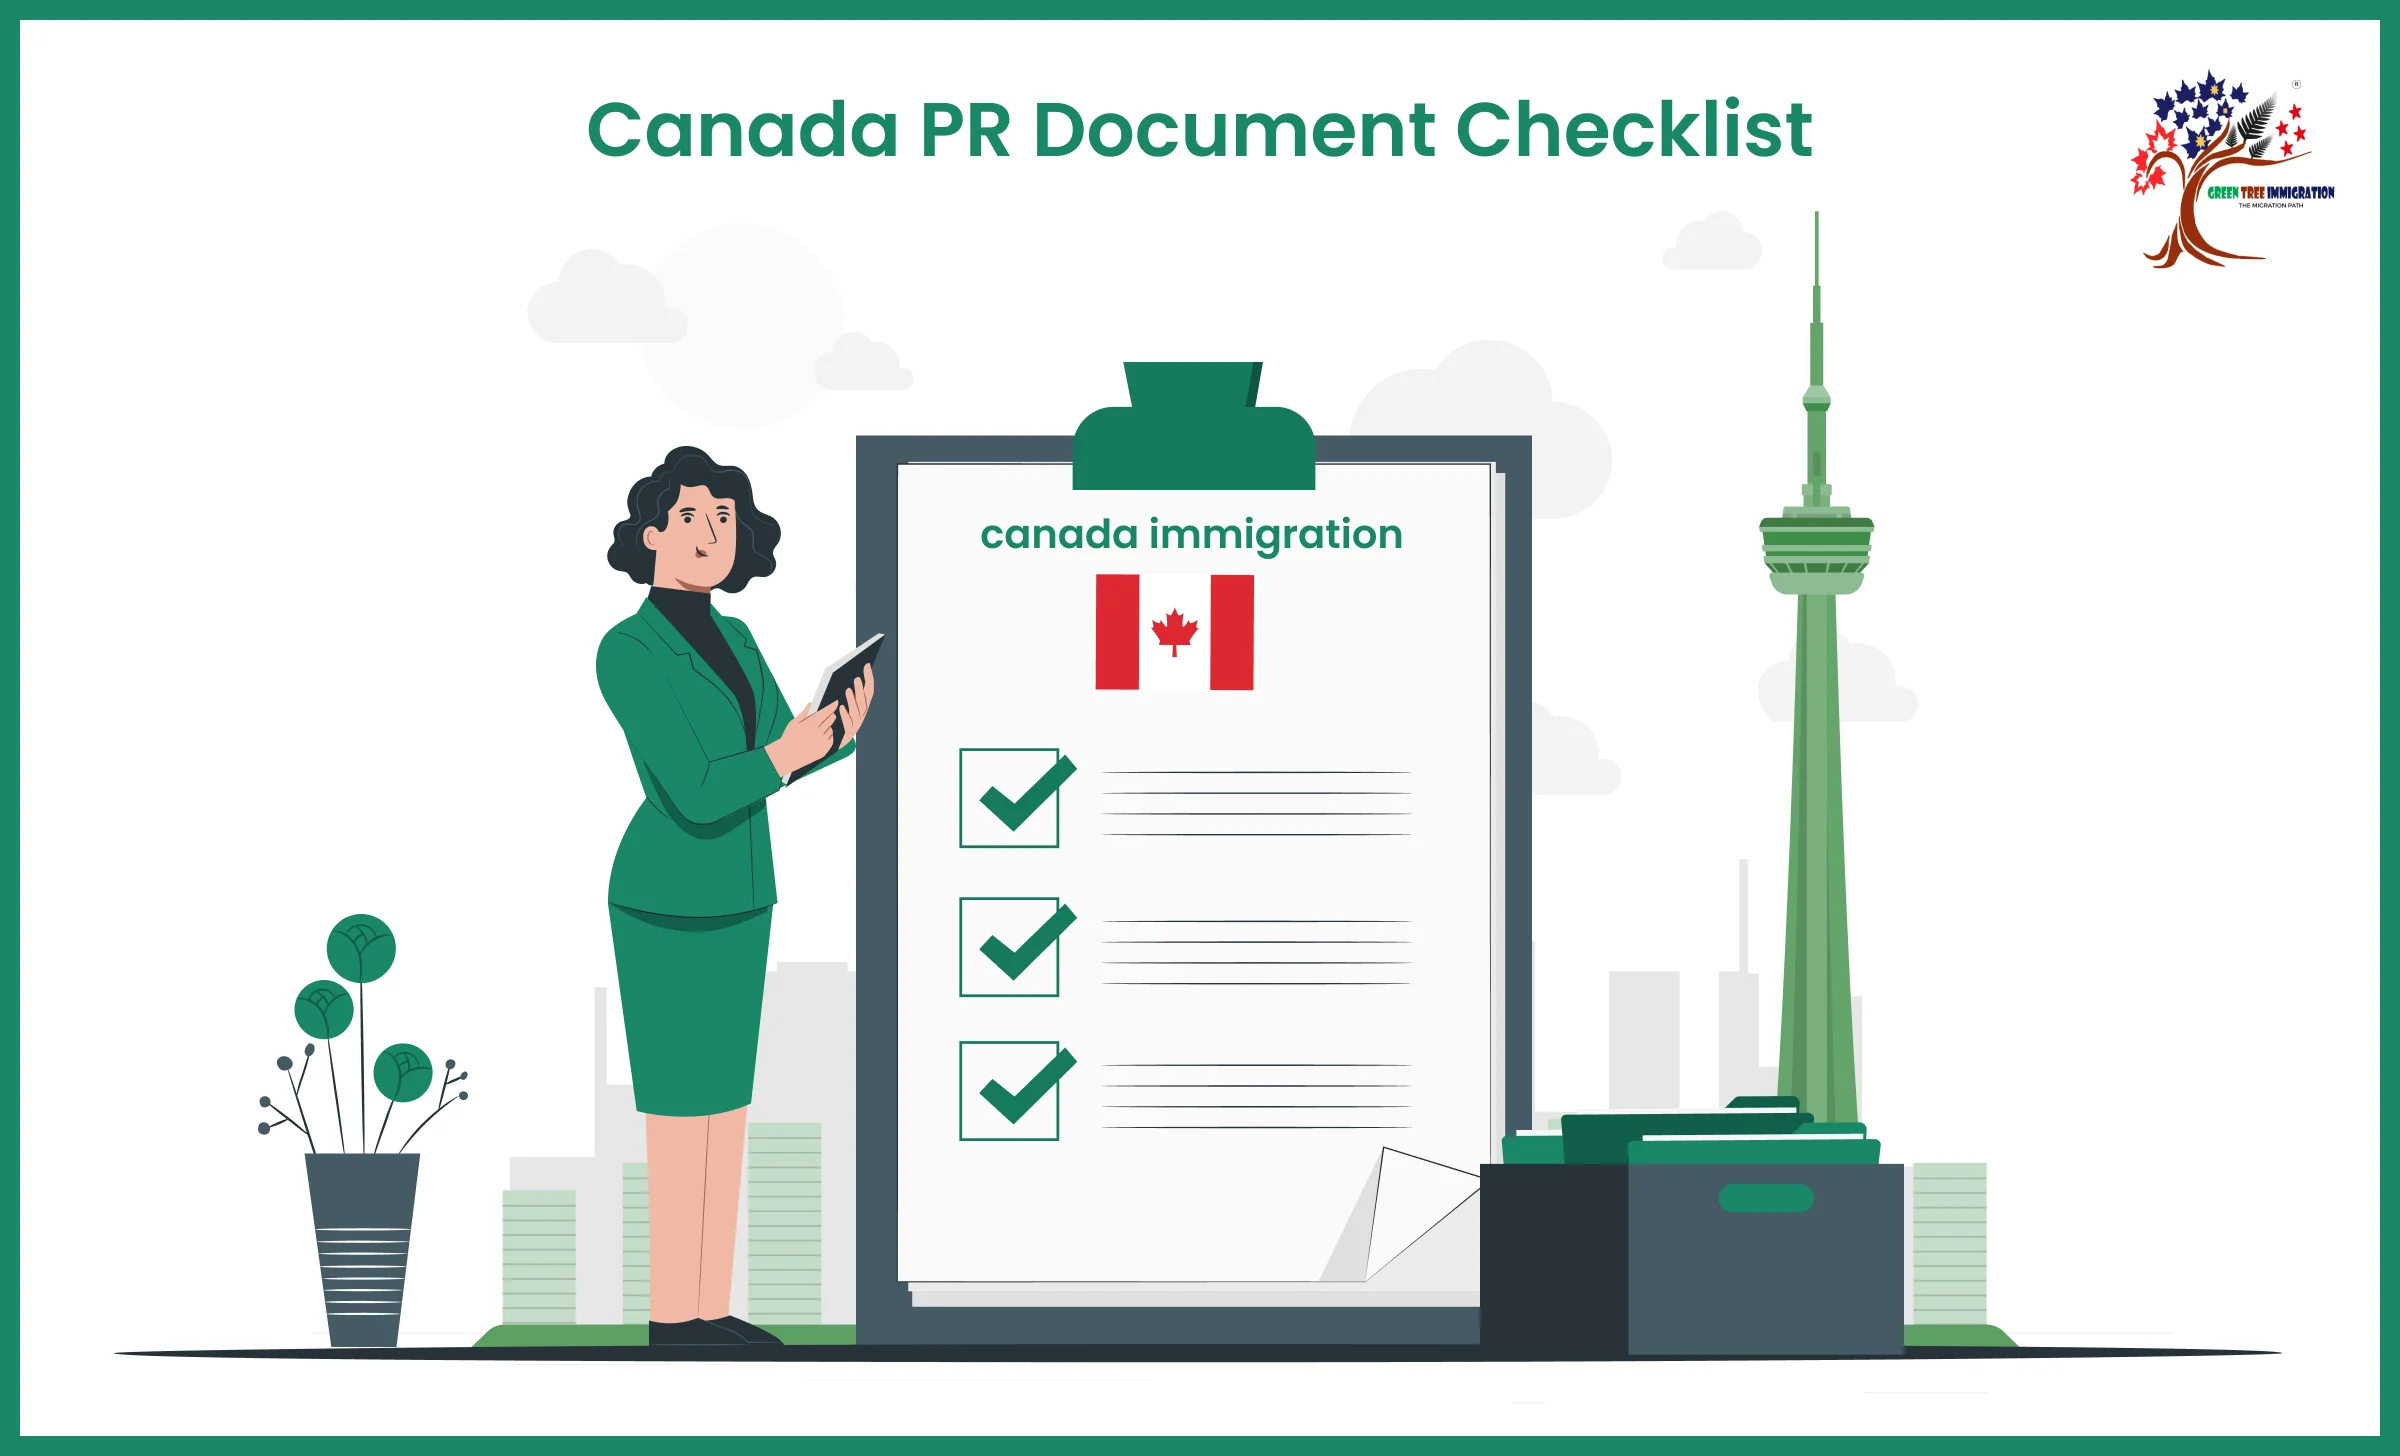 List of Documents Required for Canada PR